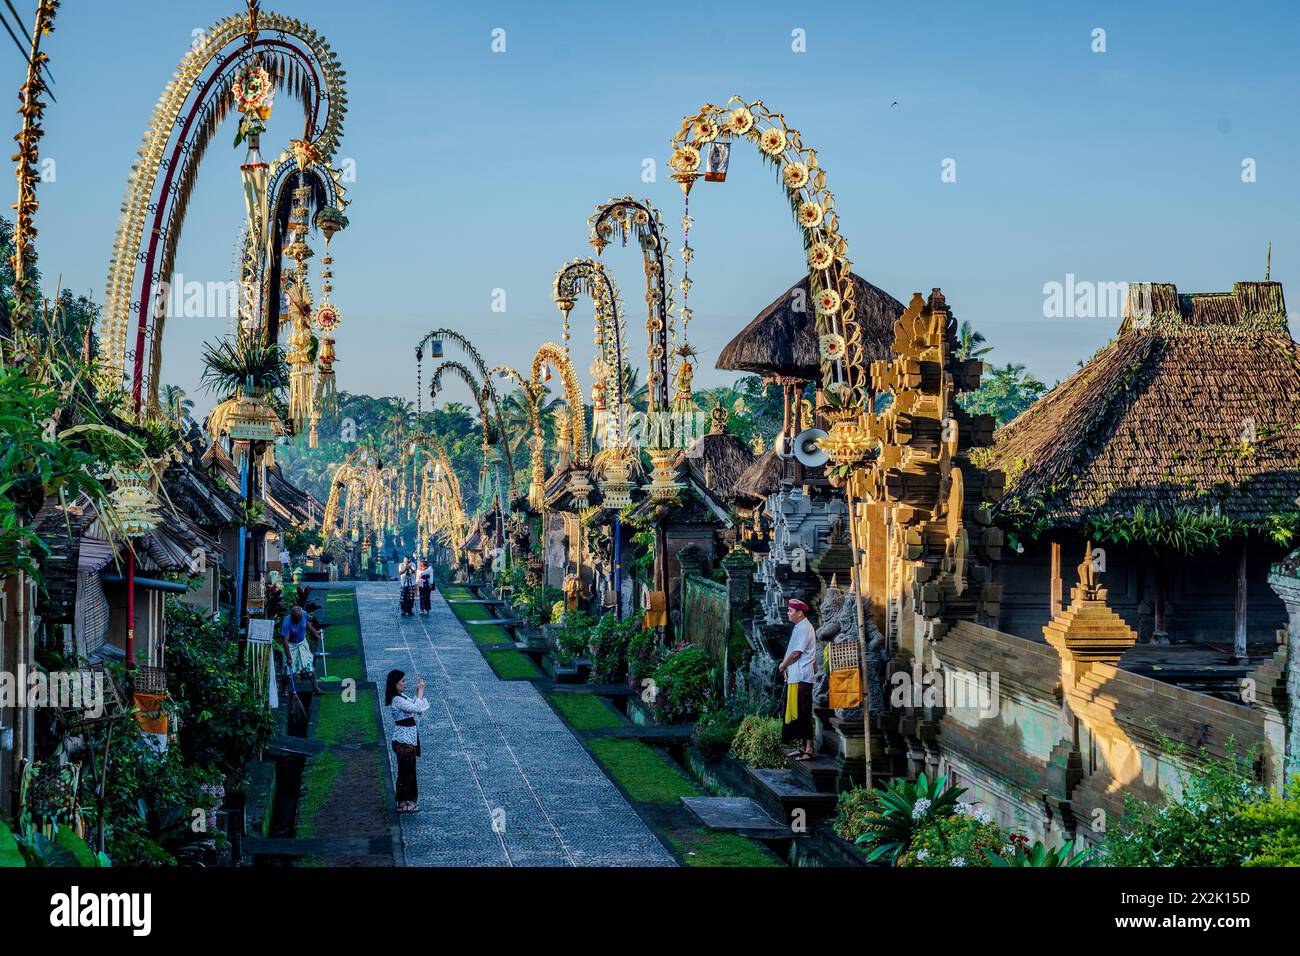 Morning view of a beautifully decorated traditional village in Bali, Indonesia, with festive bamboo poles and locals walking. Stock Photo